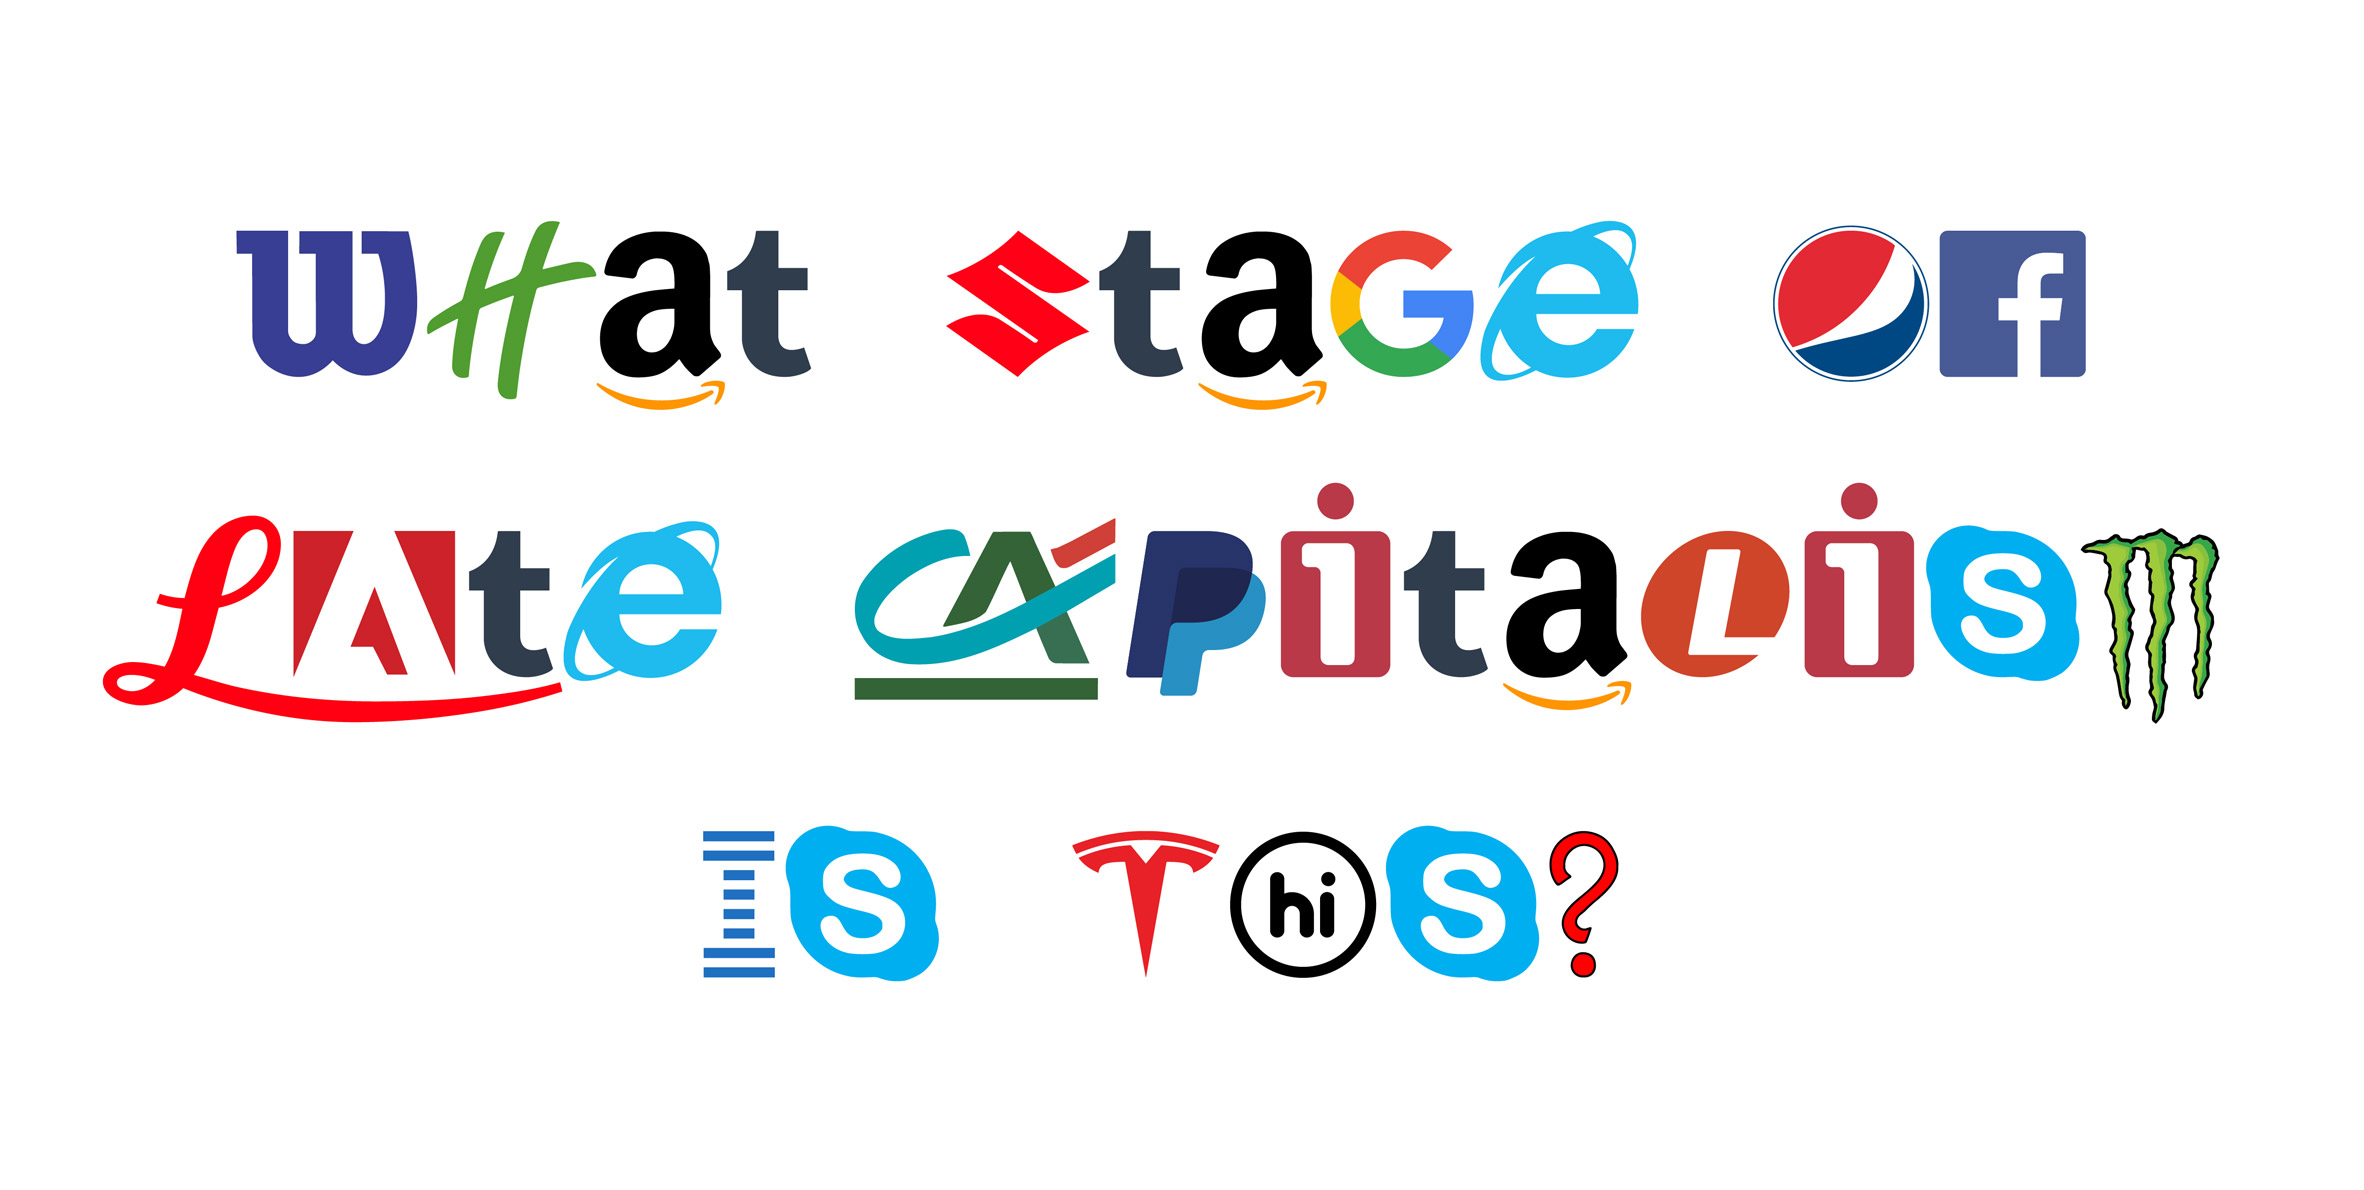 Hello Velocity spoofs capitalism with typeface made from brand logos